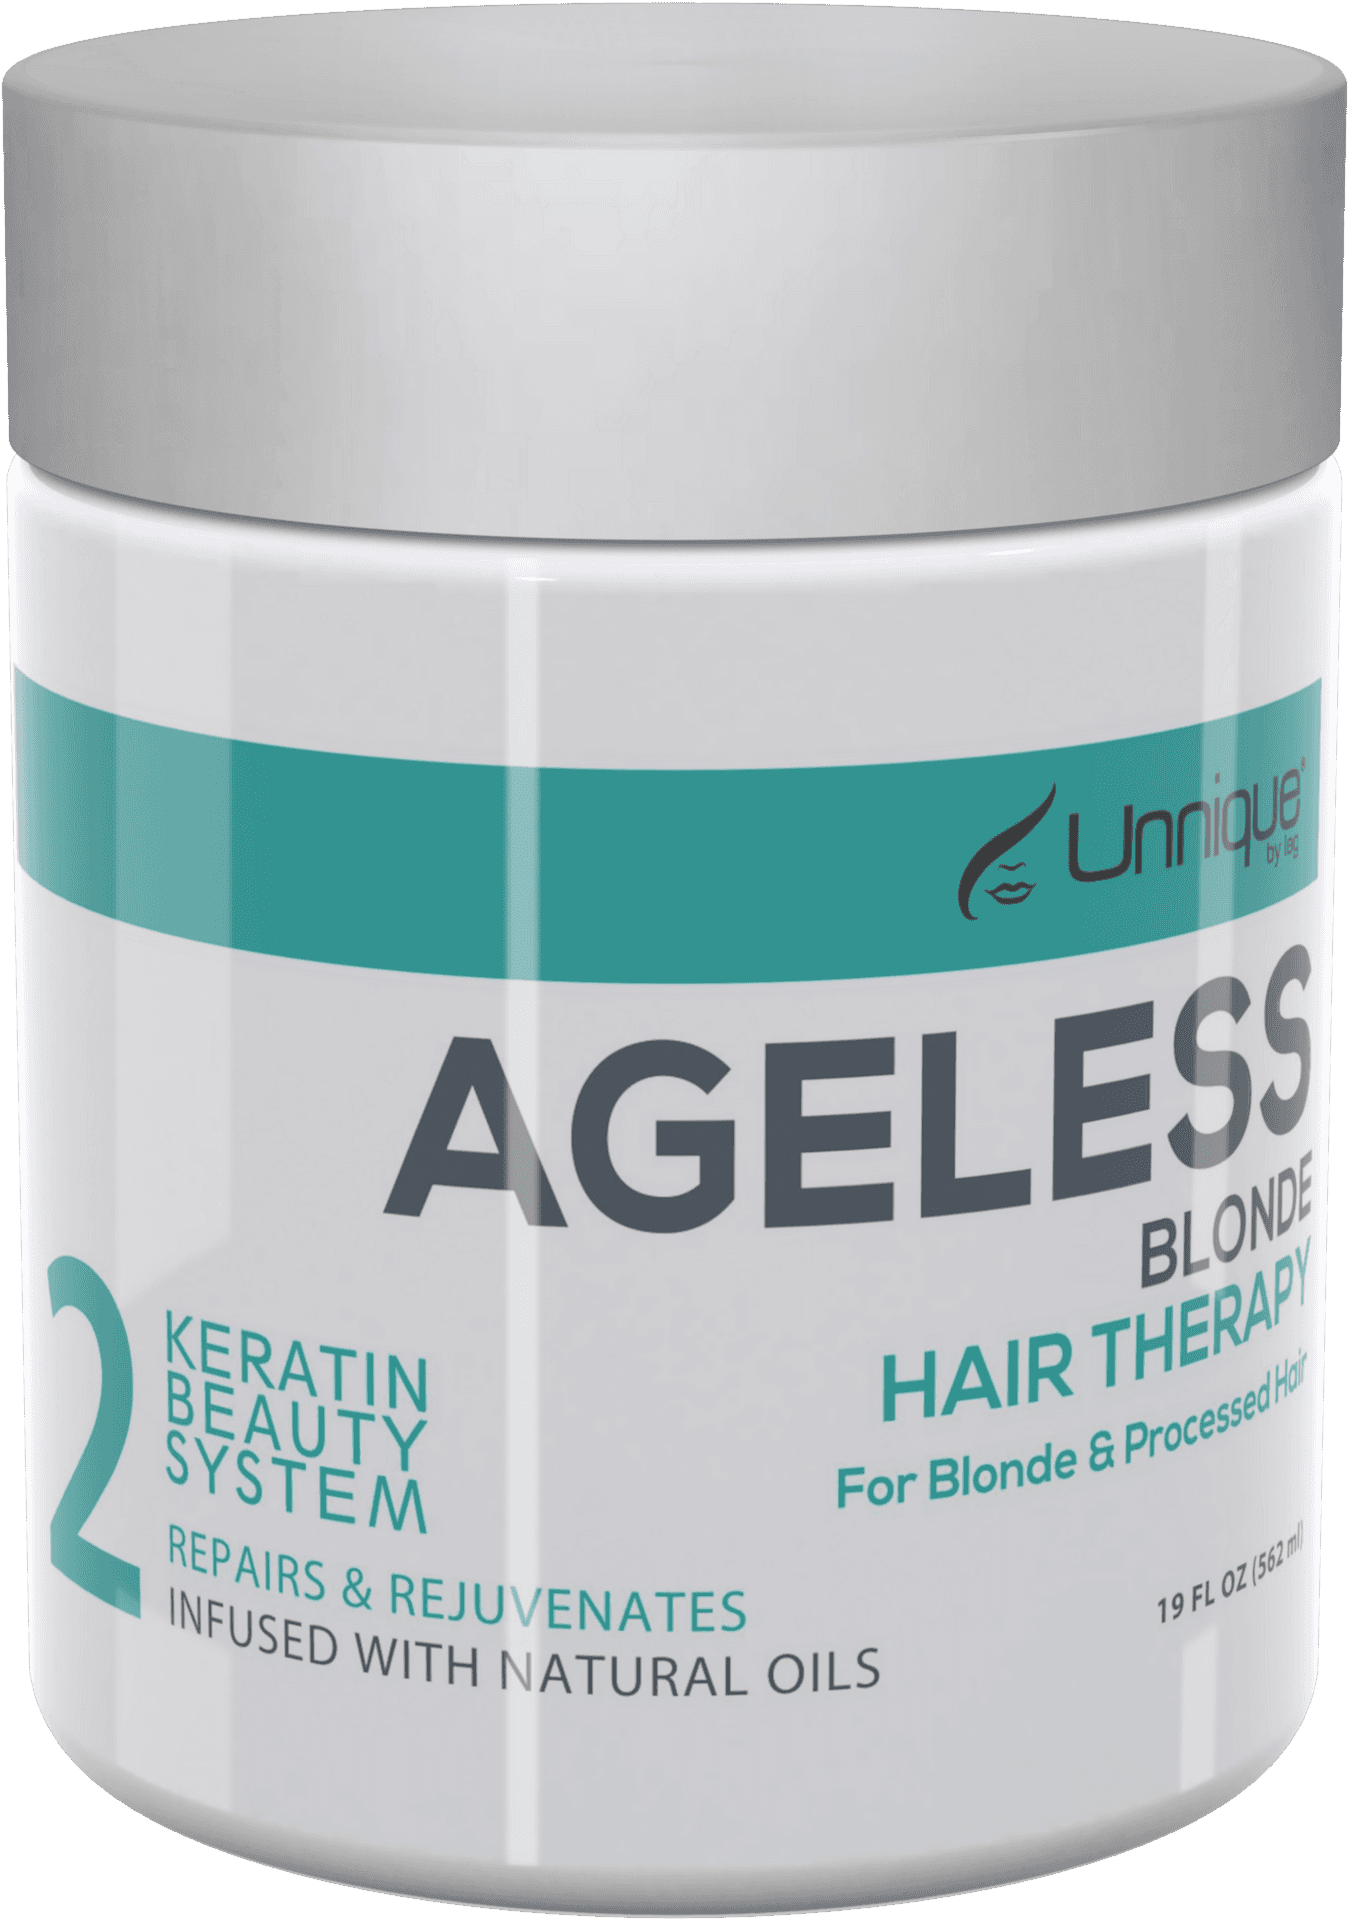 Ageless Blonde Hair Therapy Product PNG